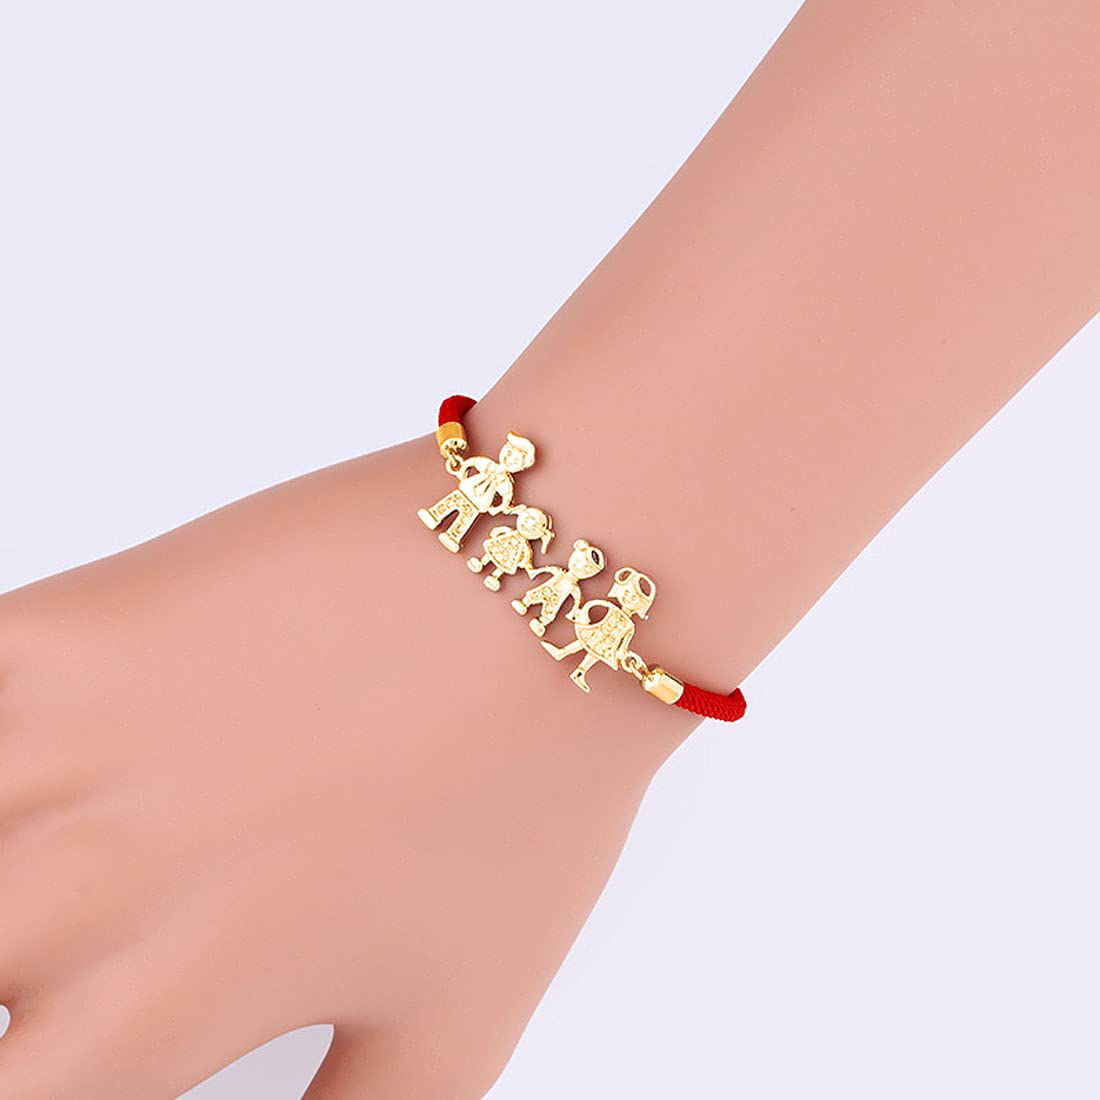 Yellow Chimes Latest Fashion Gold Toned Family Portrait Design Red Bracelet for Women and Girls